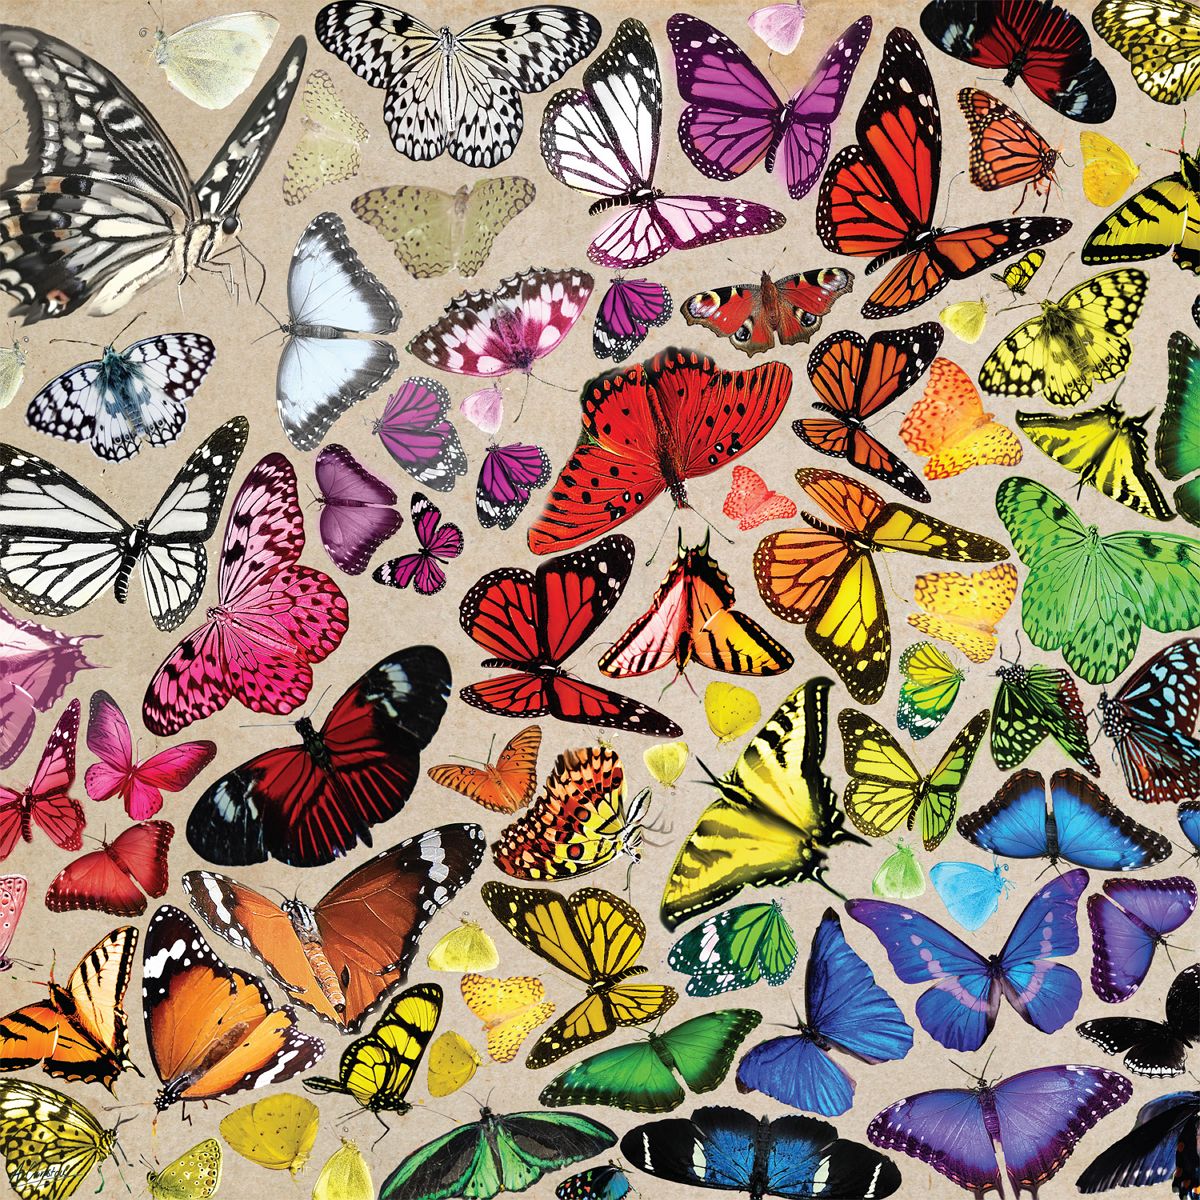 Butterfly Chroma Butterflies and Insects Jigsaw Puzzle